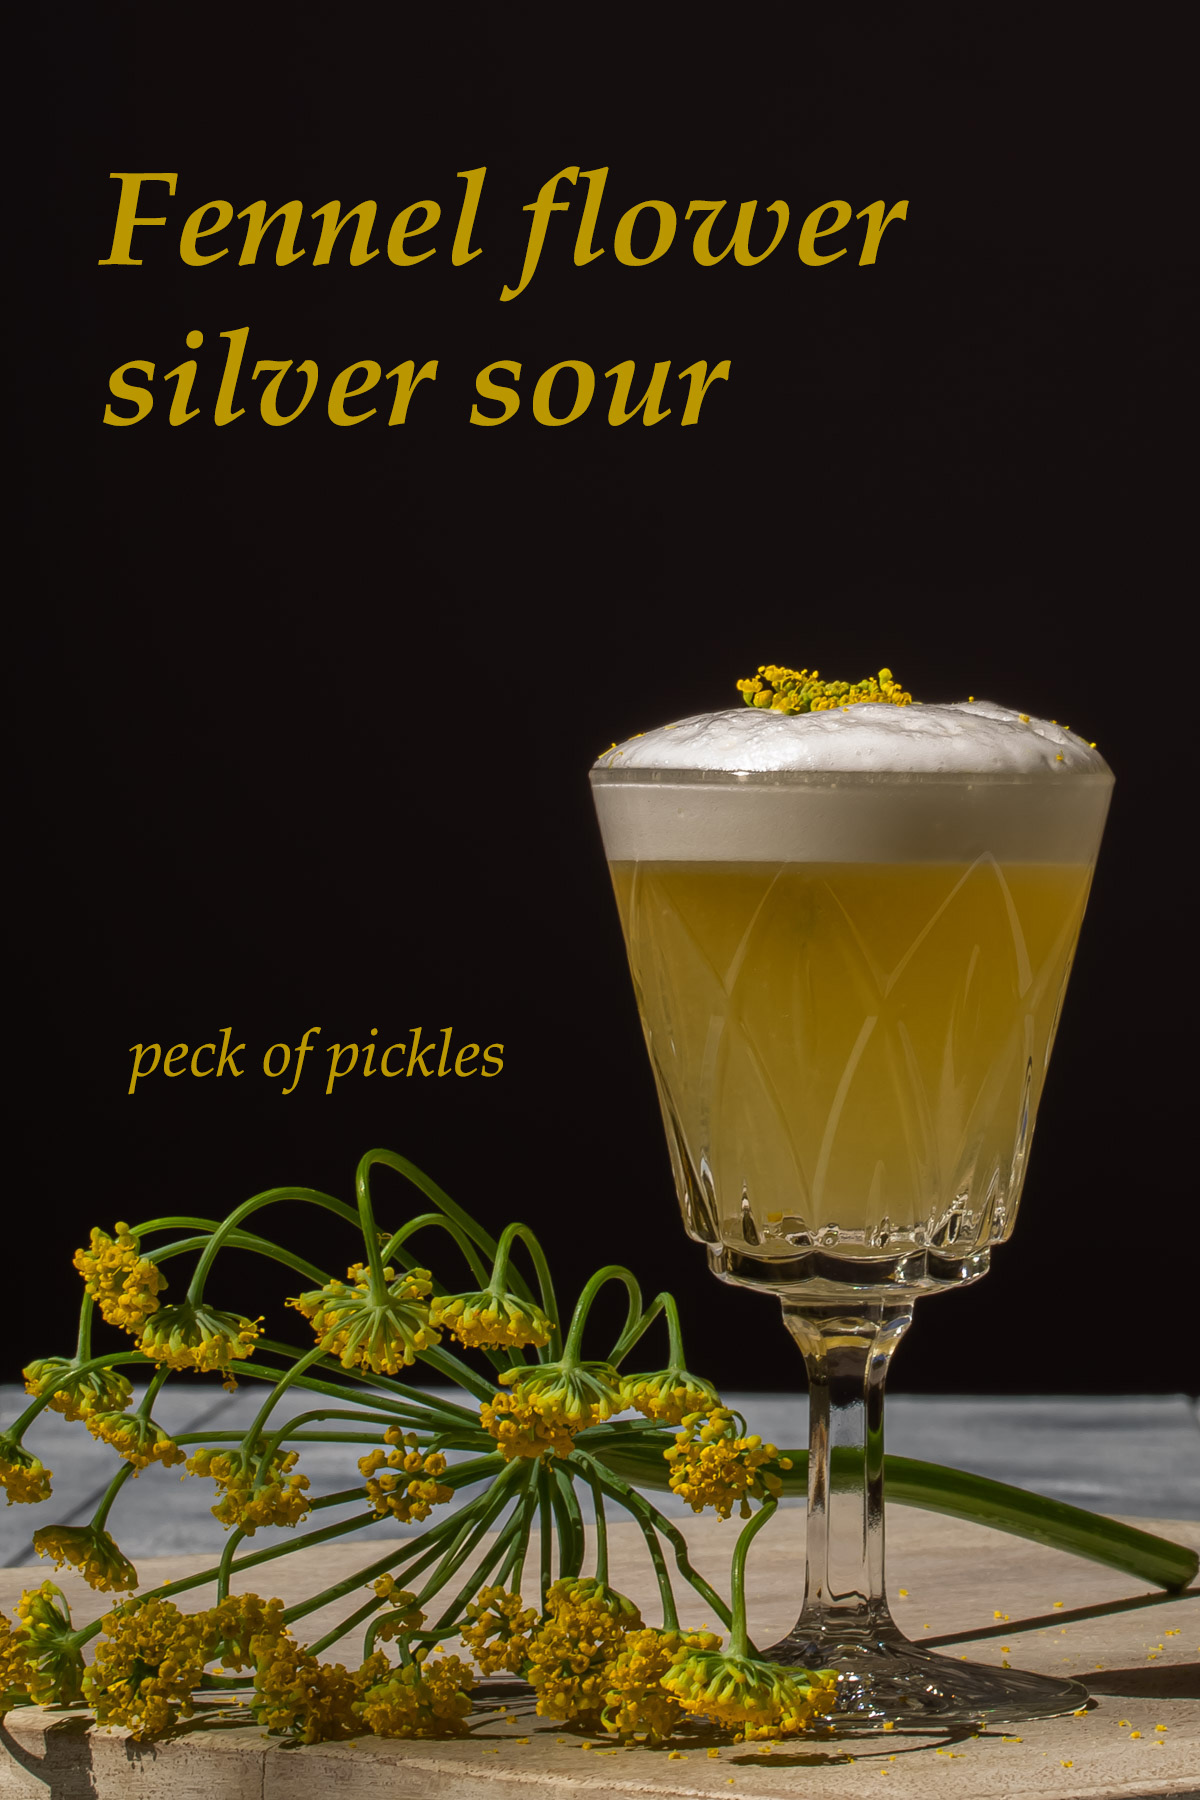 fennel flower silver sour with fennel umbrel